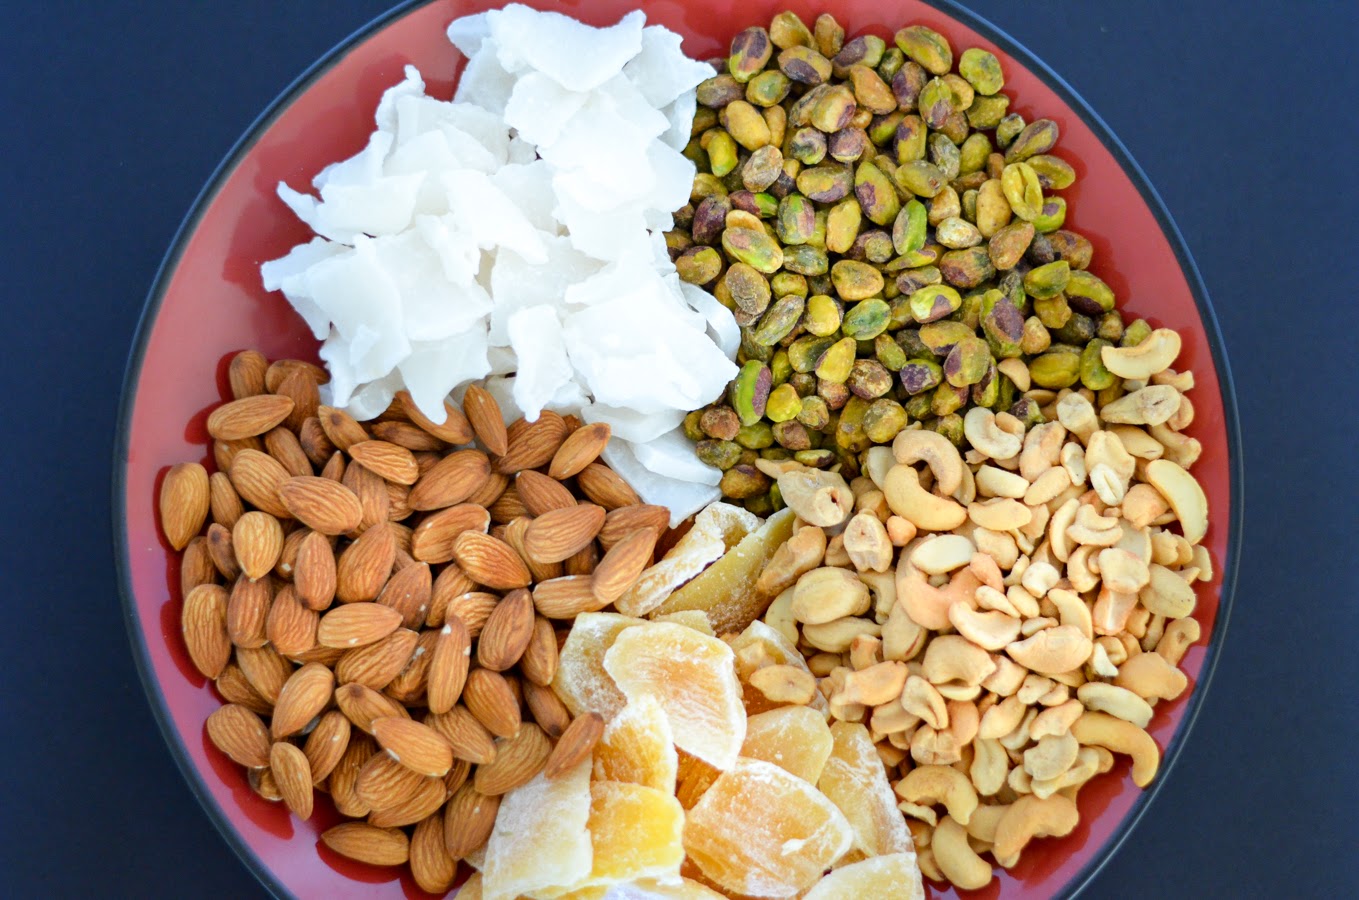 Island Tropical Trail Mix w. Dried Mango, Coconut, Cashews, Almonds, and so much more